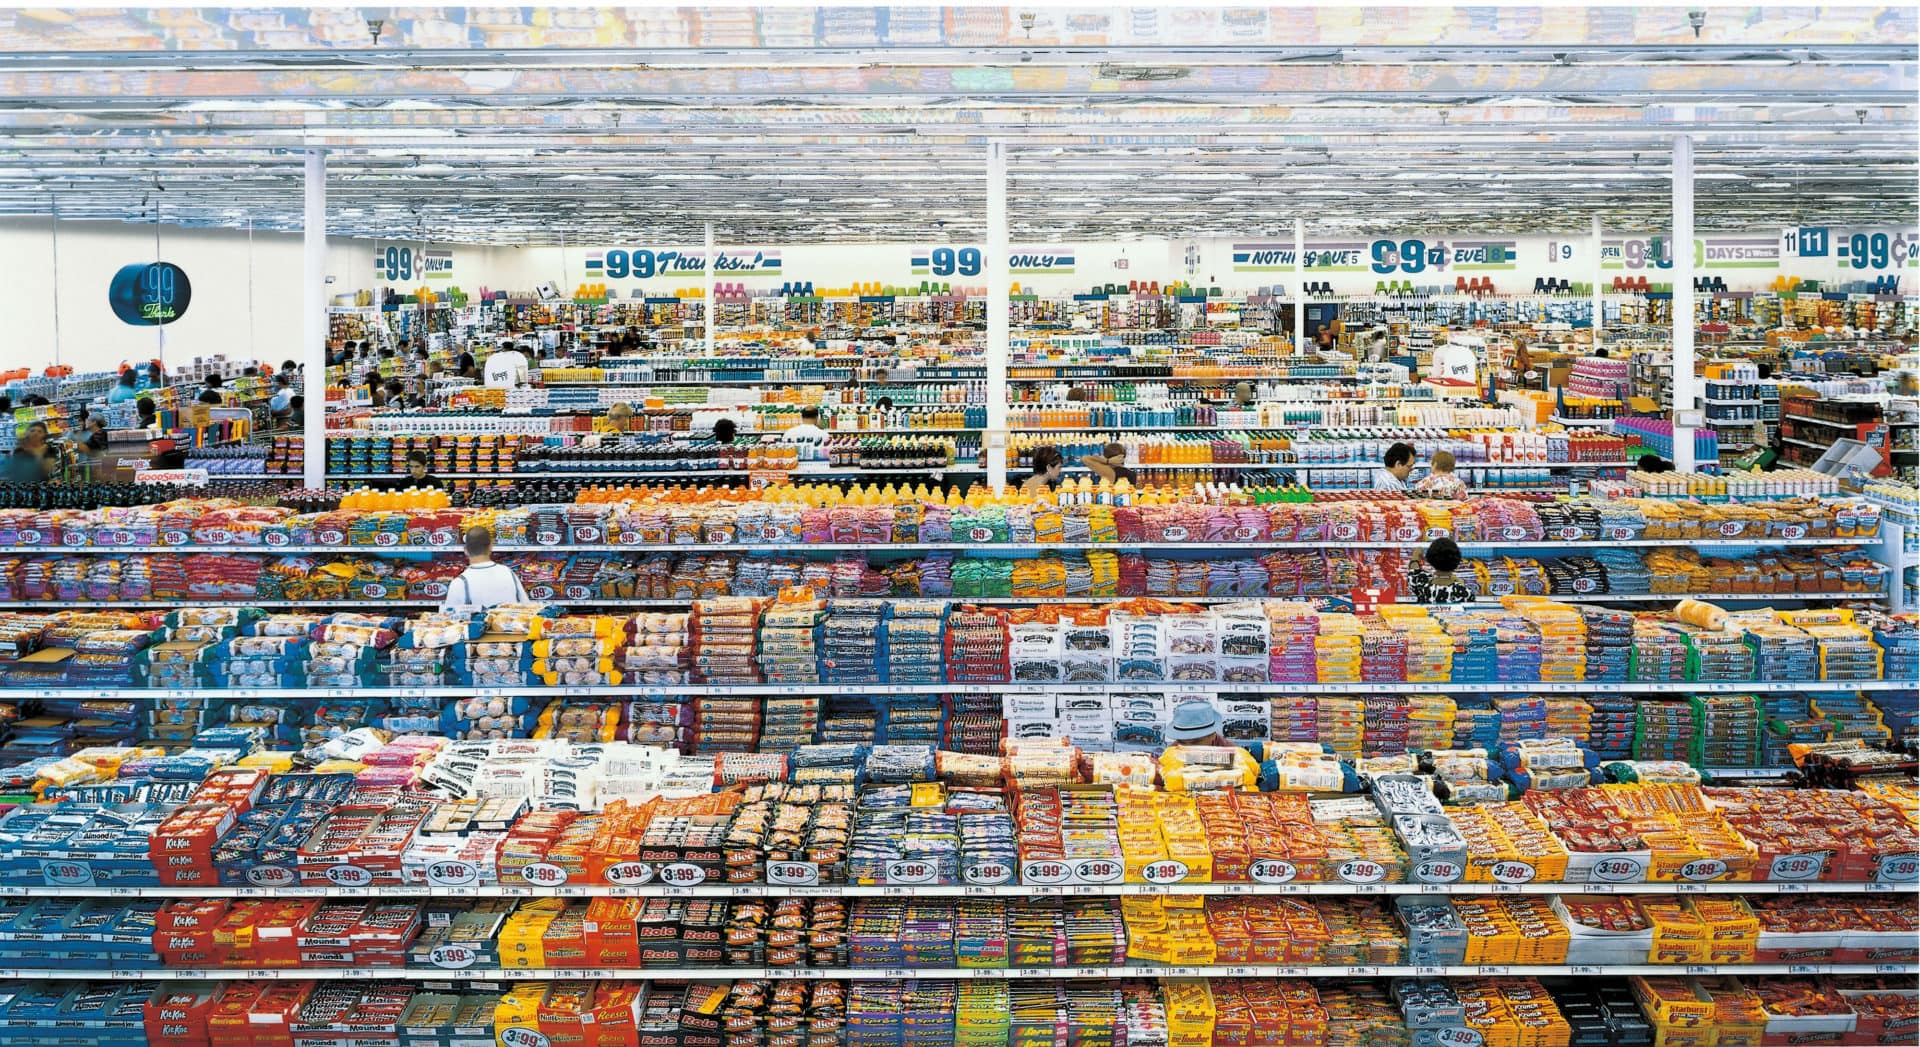 Andreas Gursky, 99 Cent